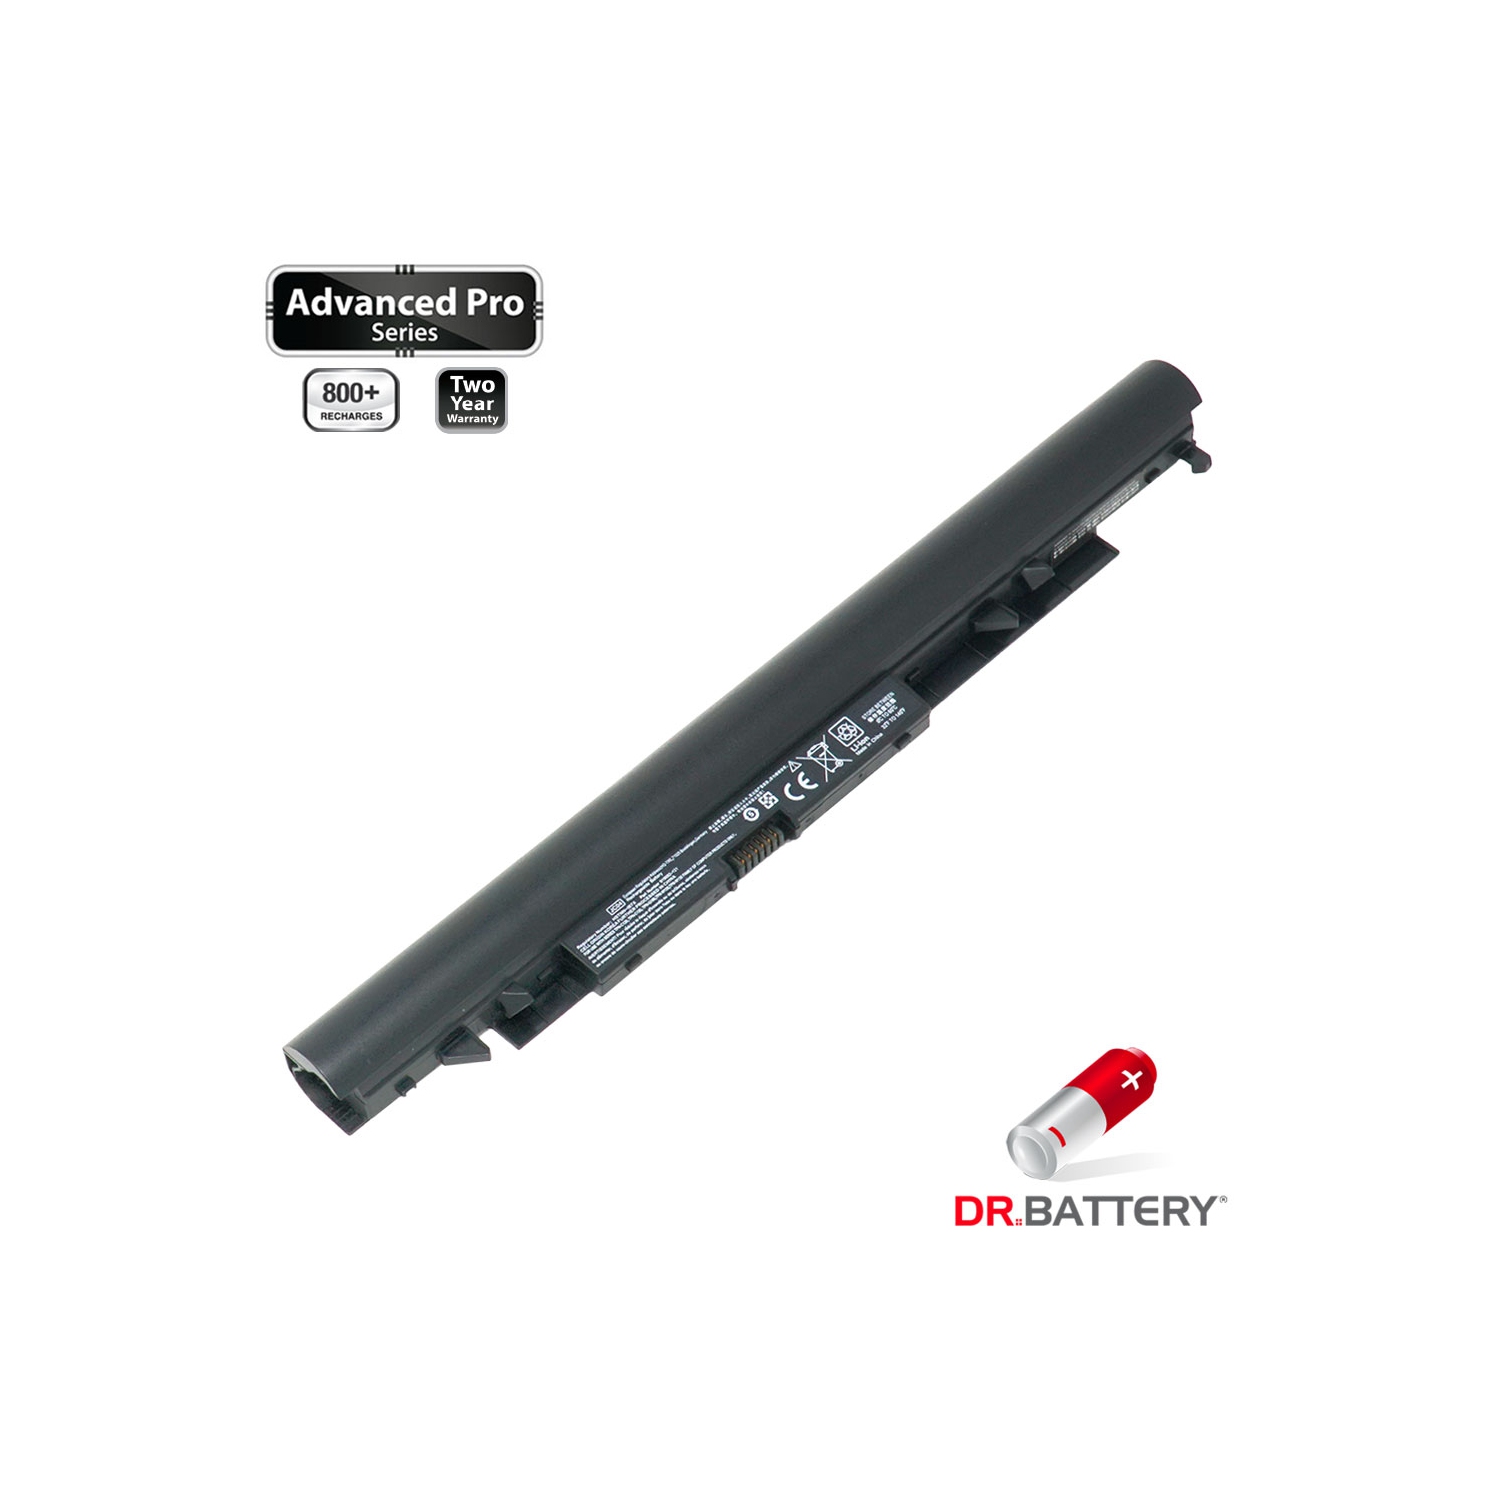 Dr. Battery - Samsung SDI Cells for HP 245 G5 Y0T72PA / 245 G6 / 245 G6 2UE06PA / TPN-W130 / 2LP34AA - Free Shipping